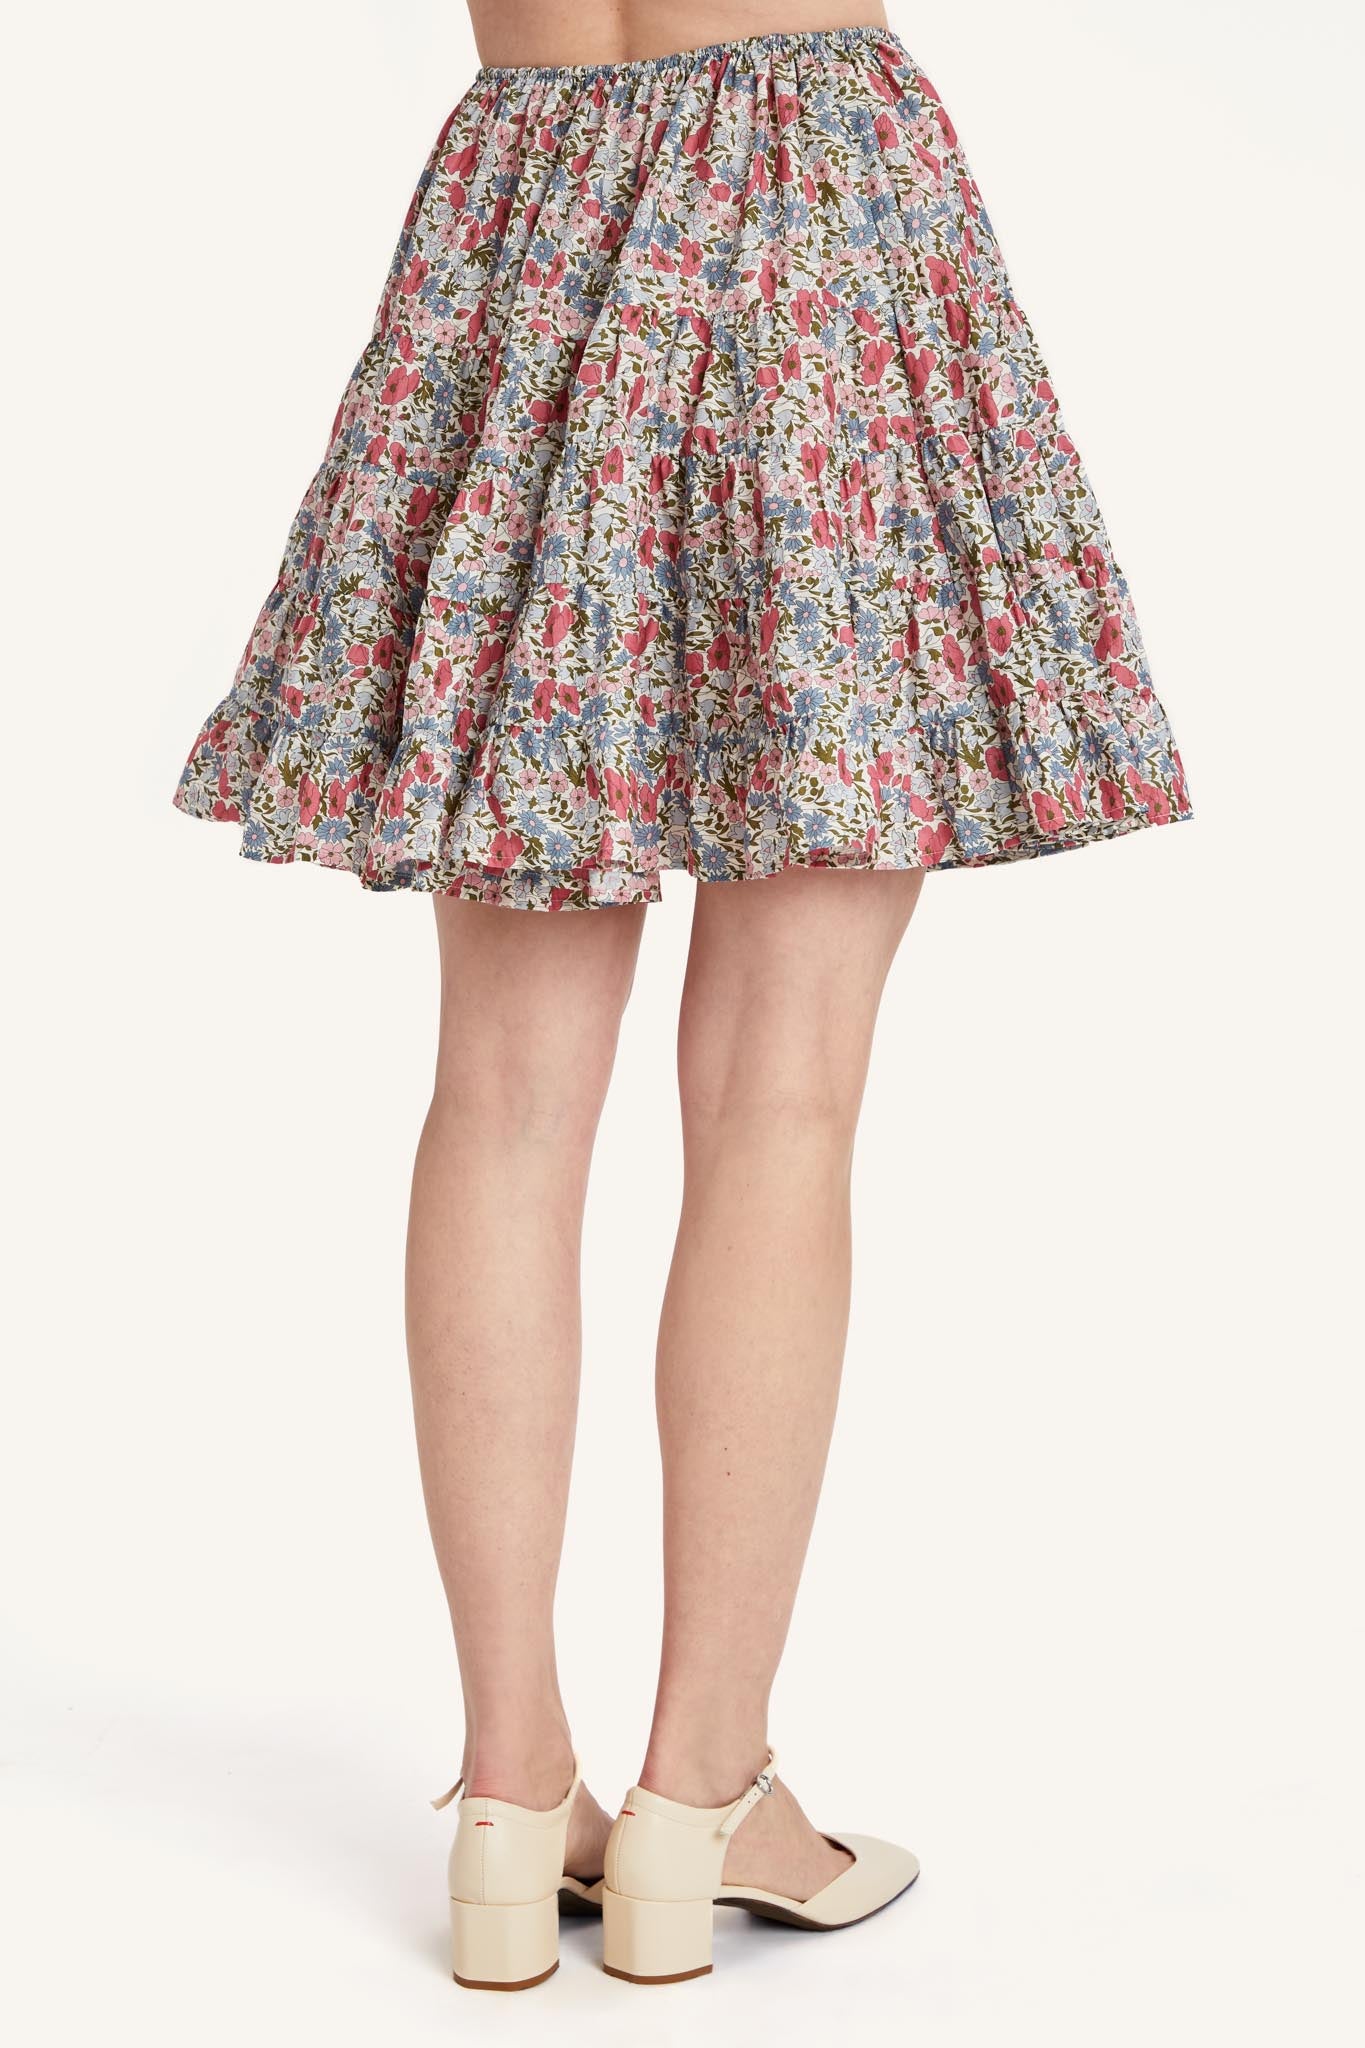 Hill Skirt in Liberty Pink Print